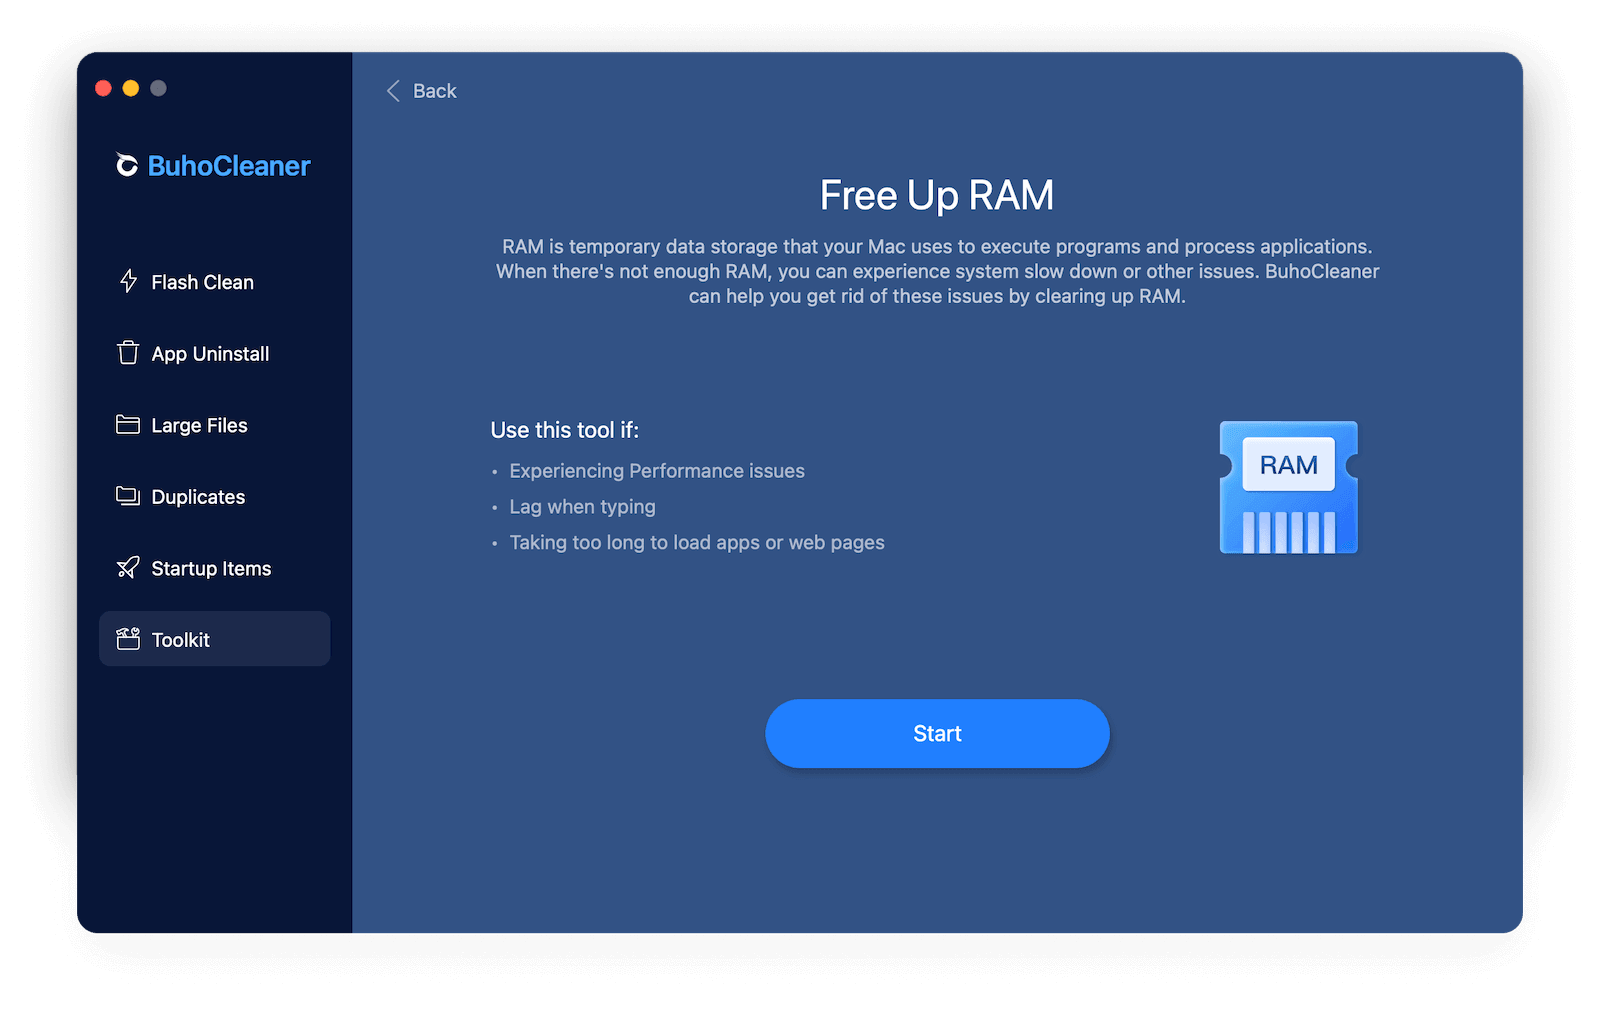 Free Up RAM with BuhoCleaner in One Click